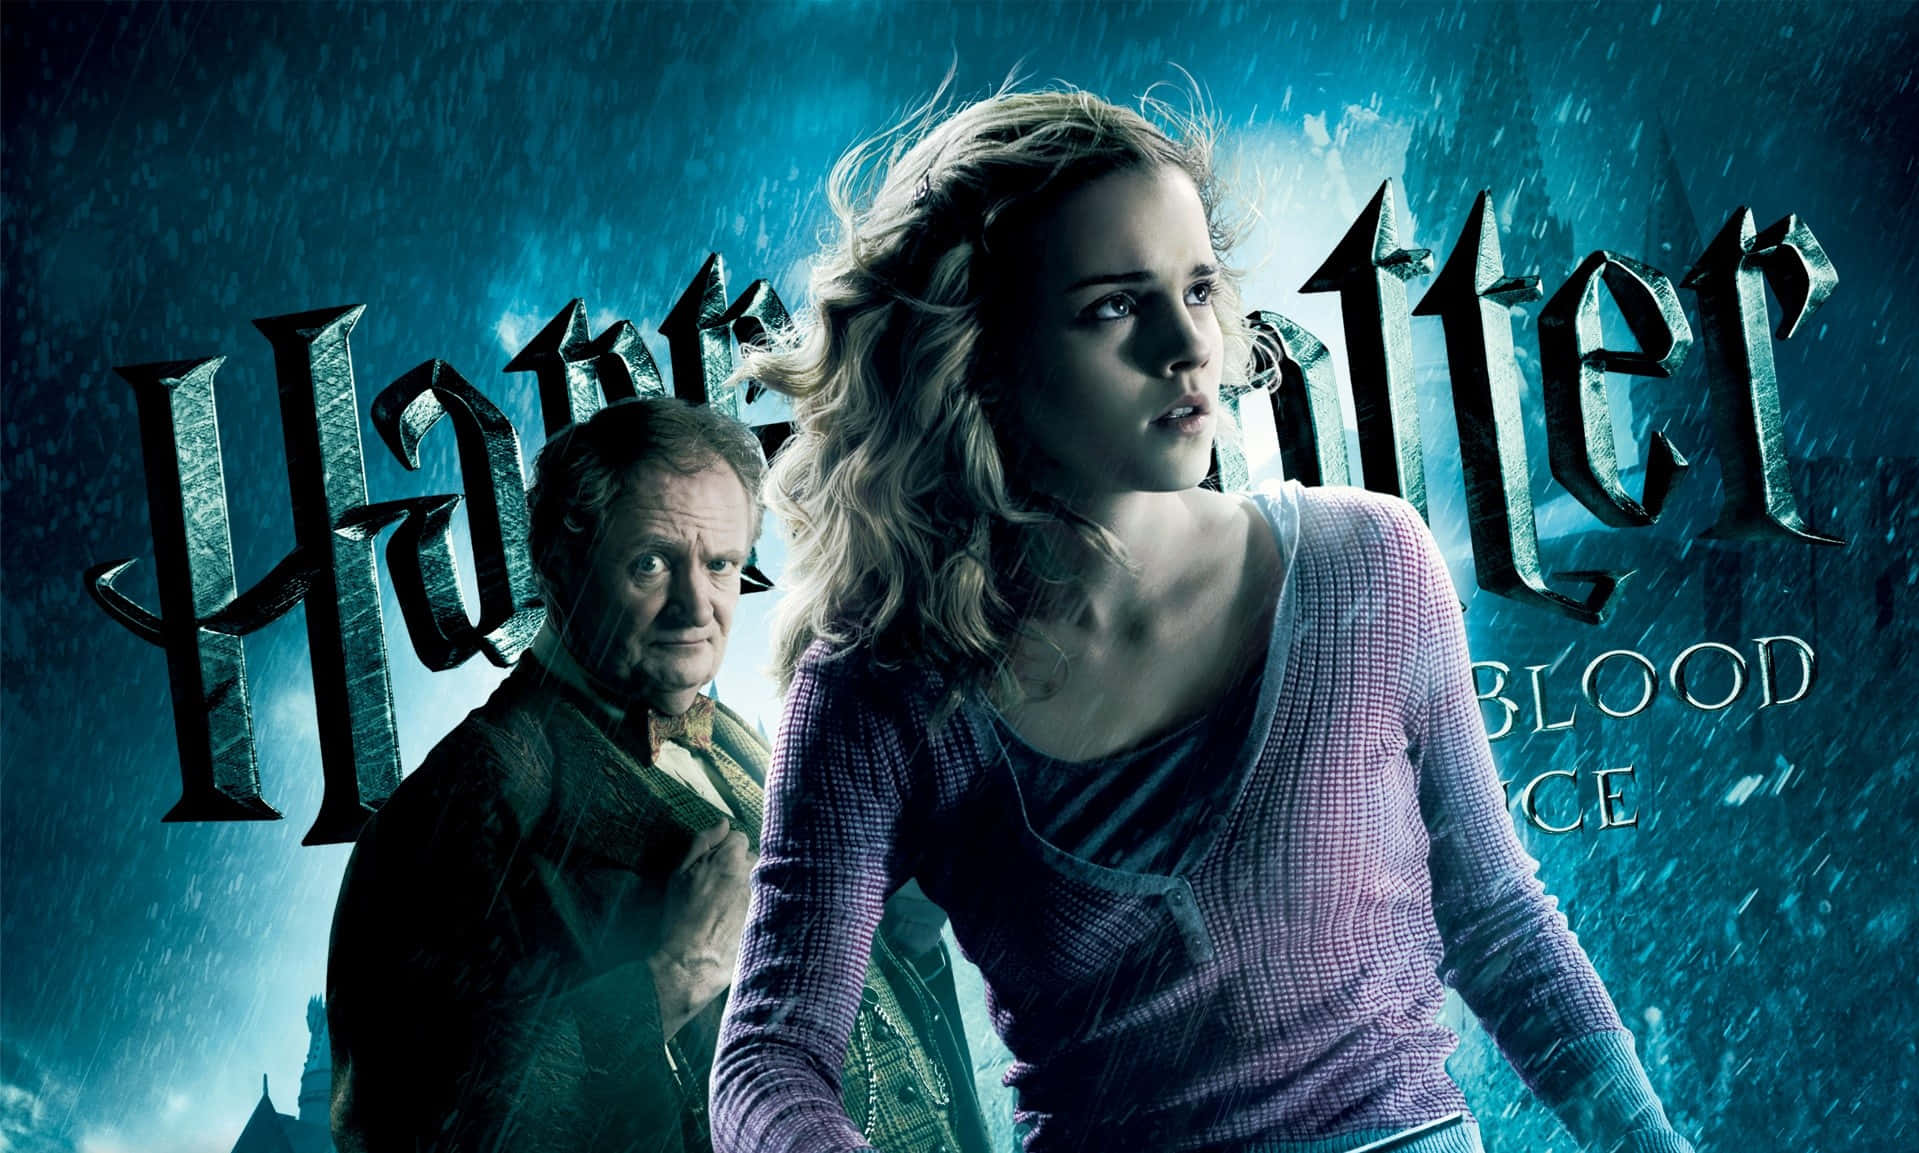 "Explore the Magical World of Harry Potter" Wallpaper